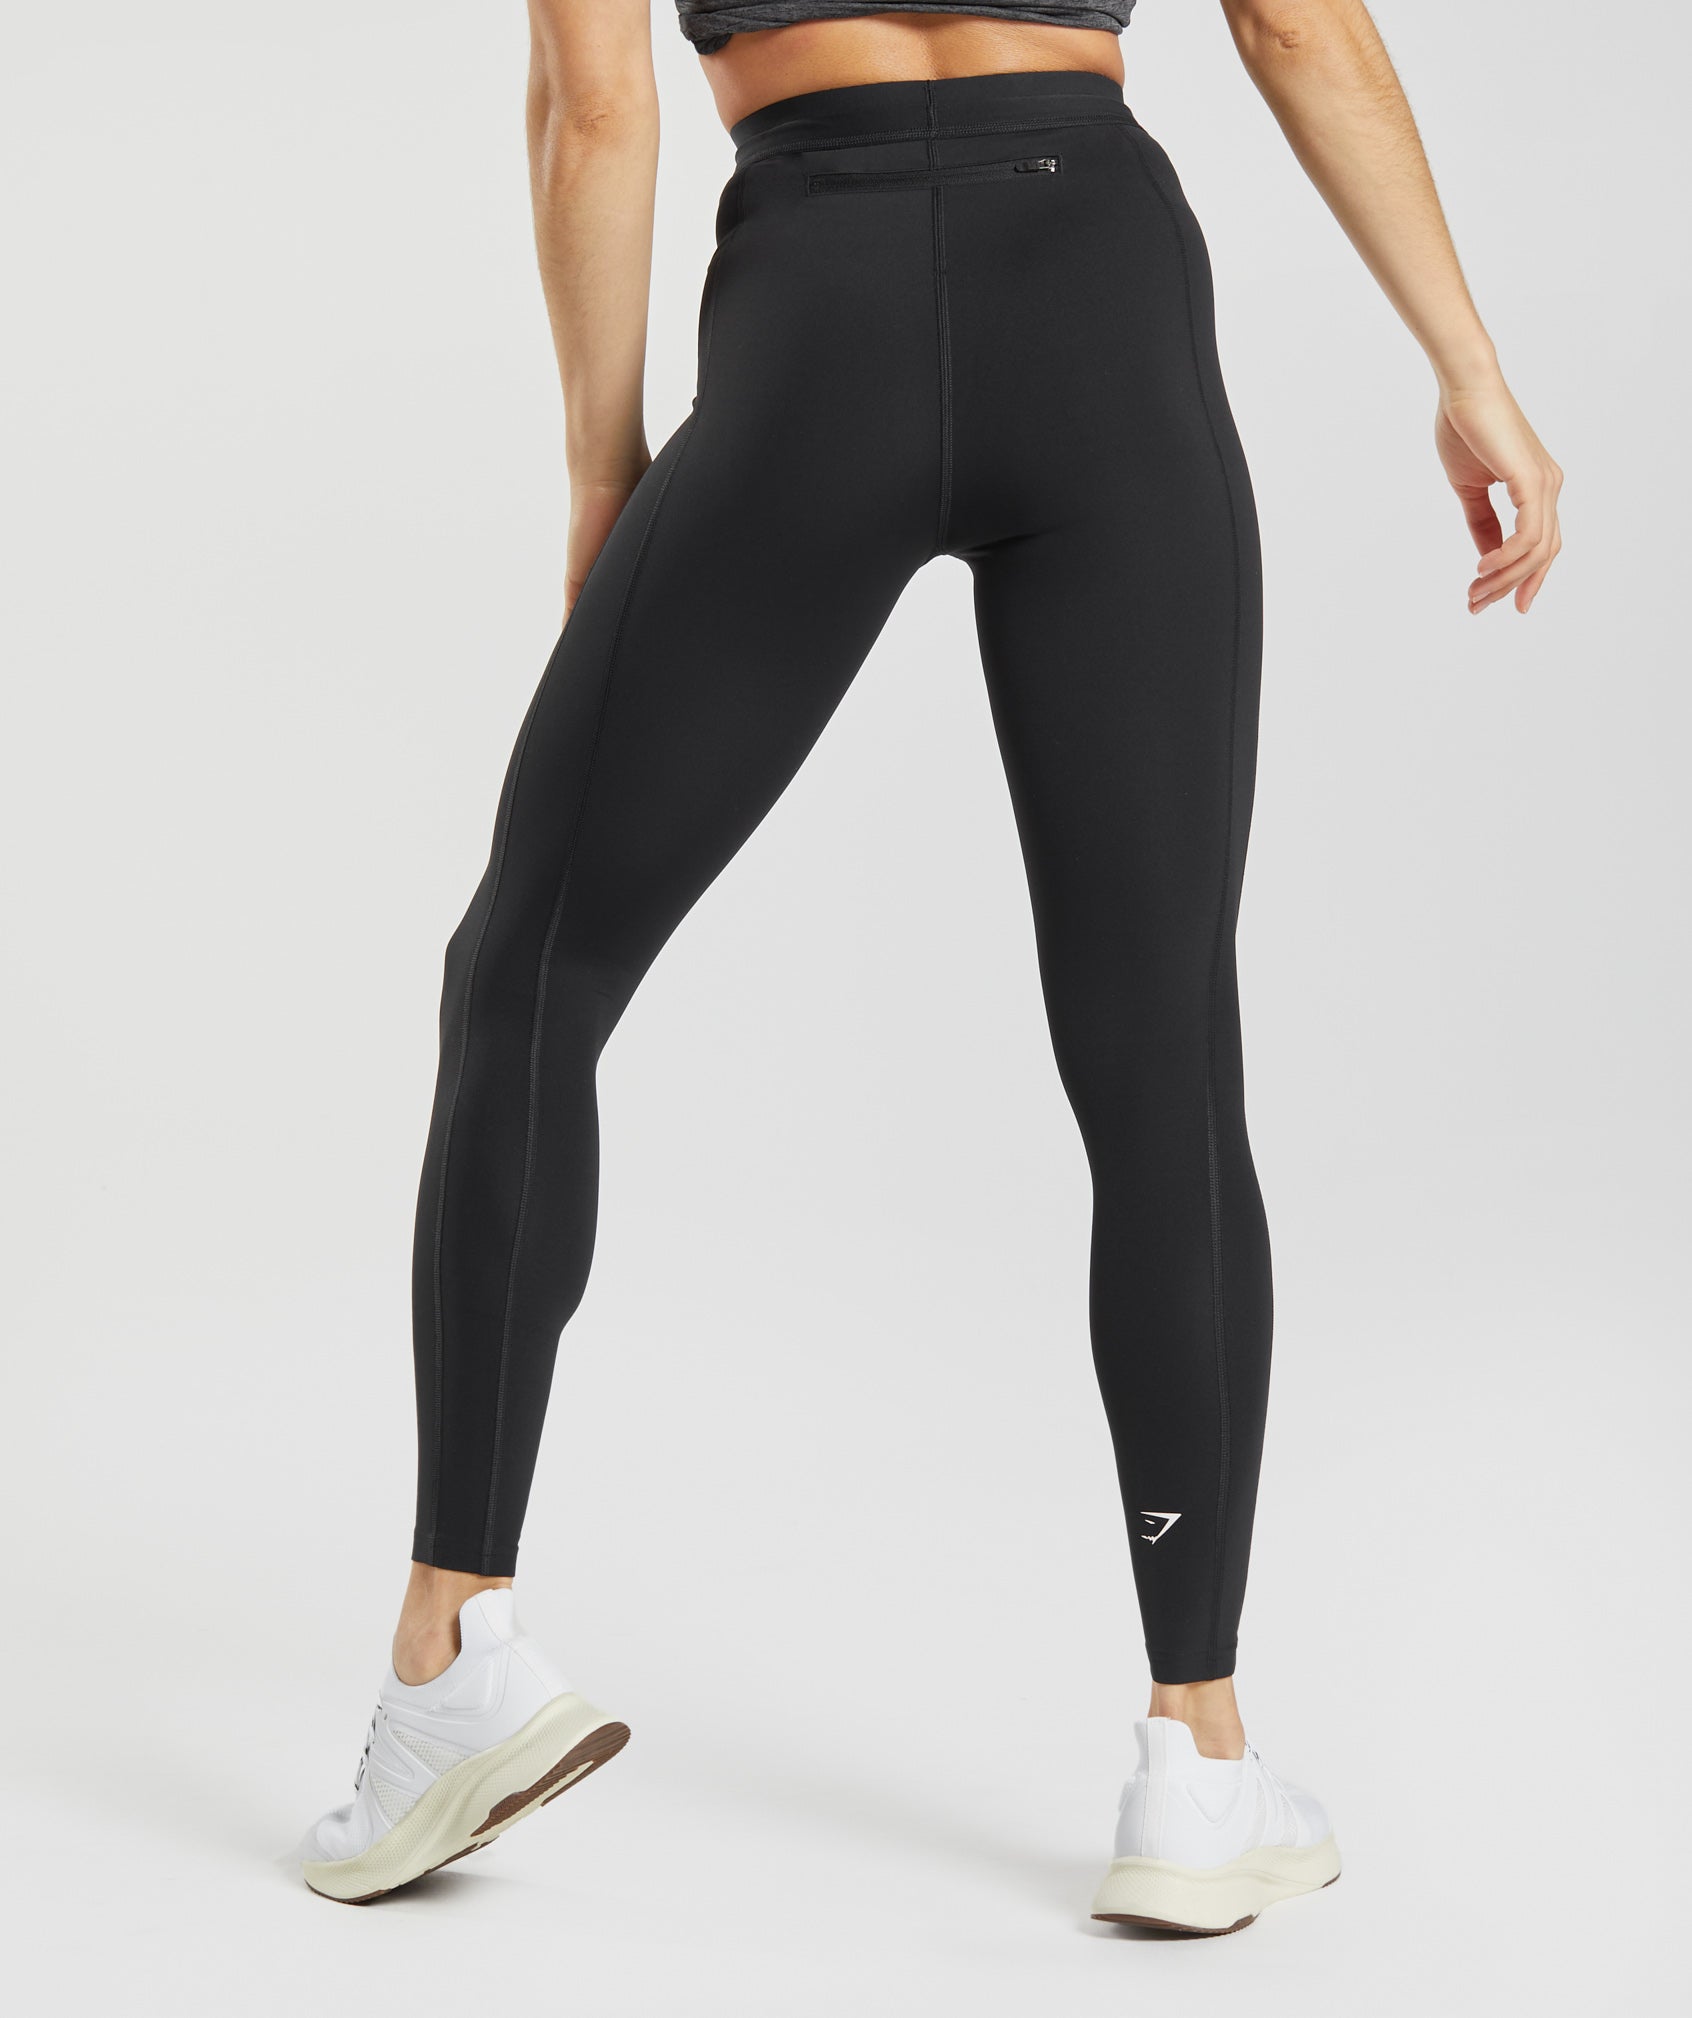 Running Clothes For Women, Running Outfits